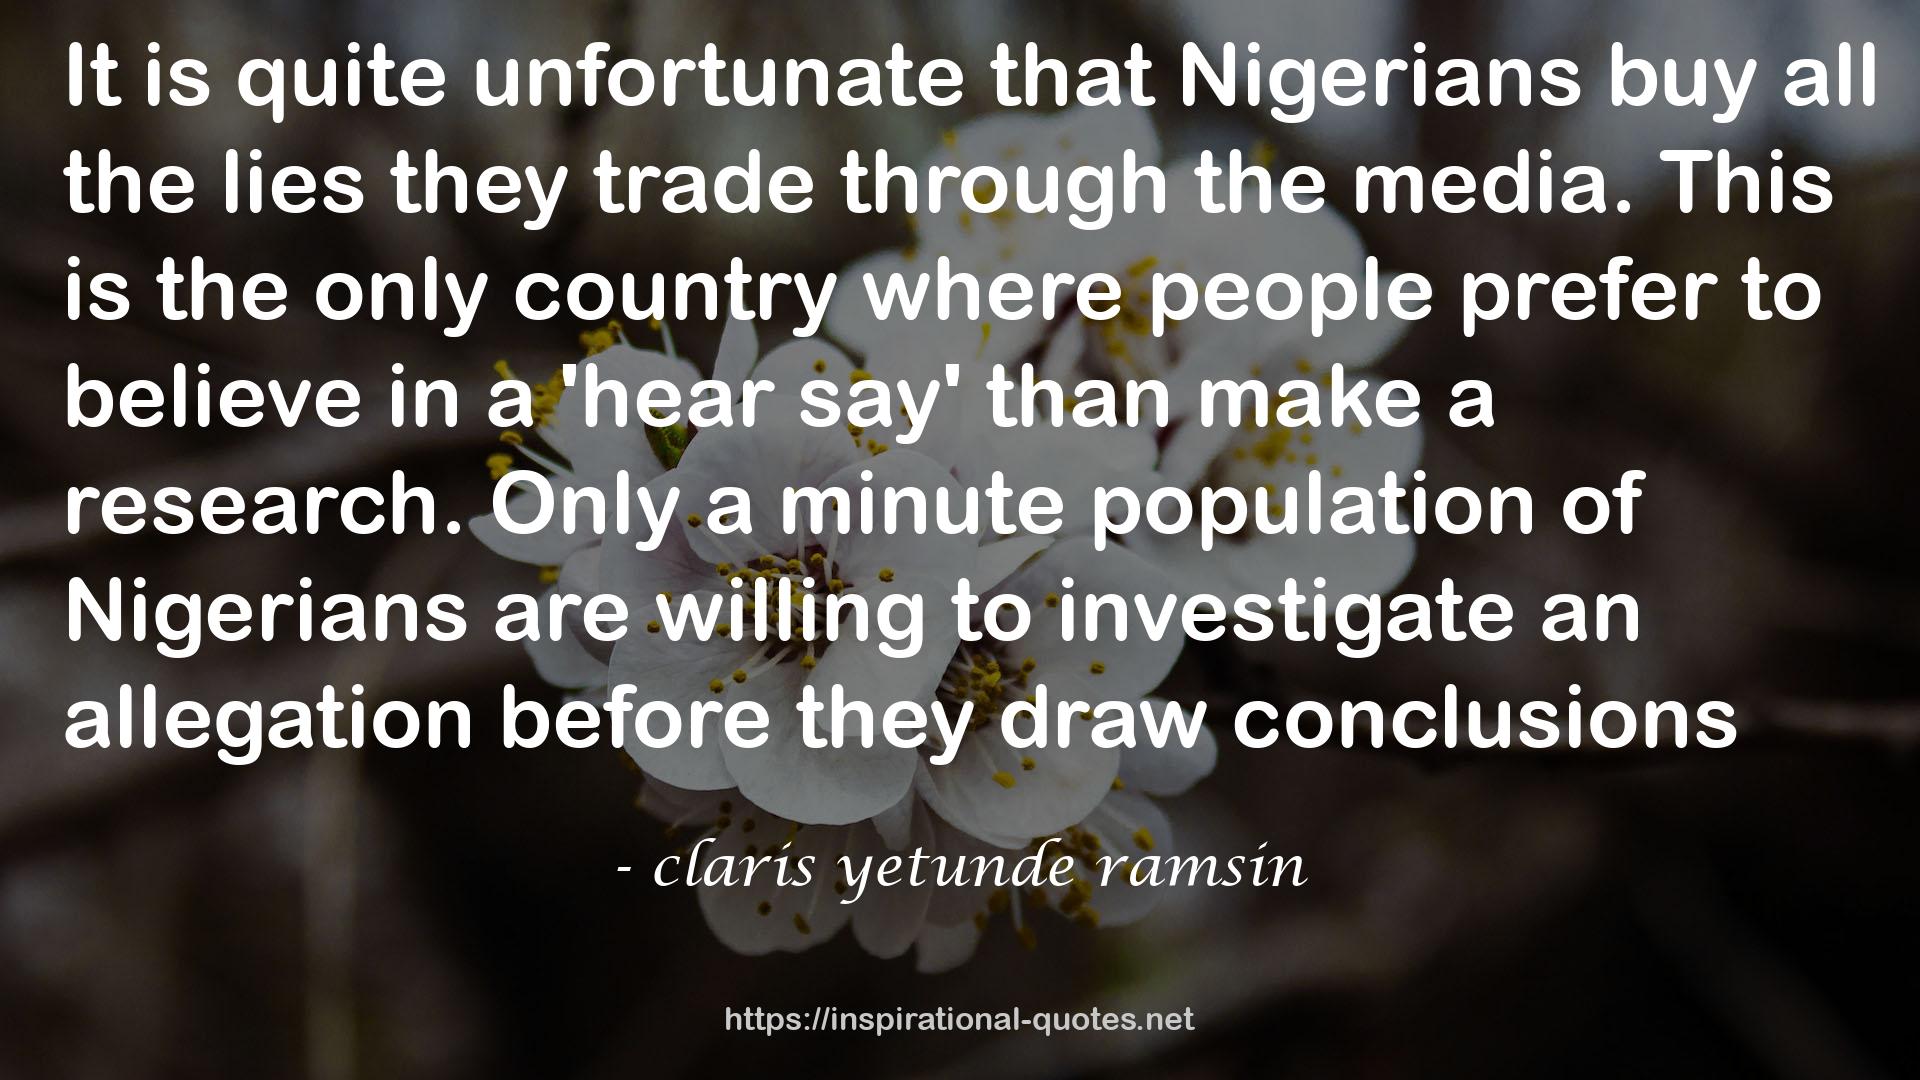 claris yetunde ramsin QUOTES